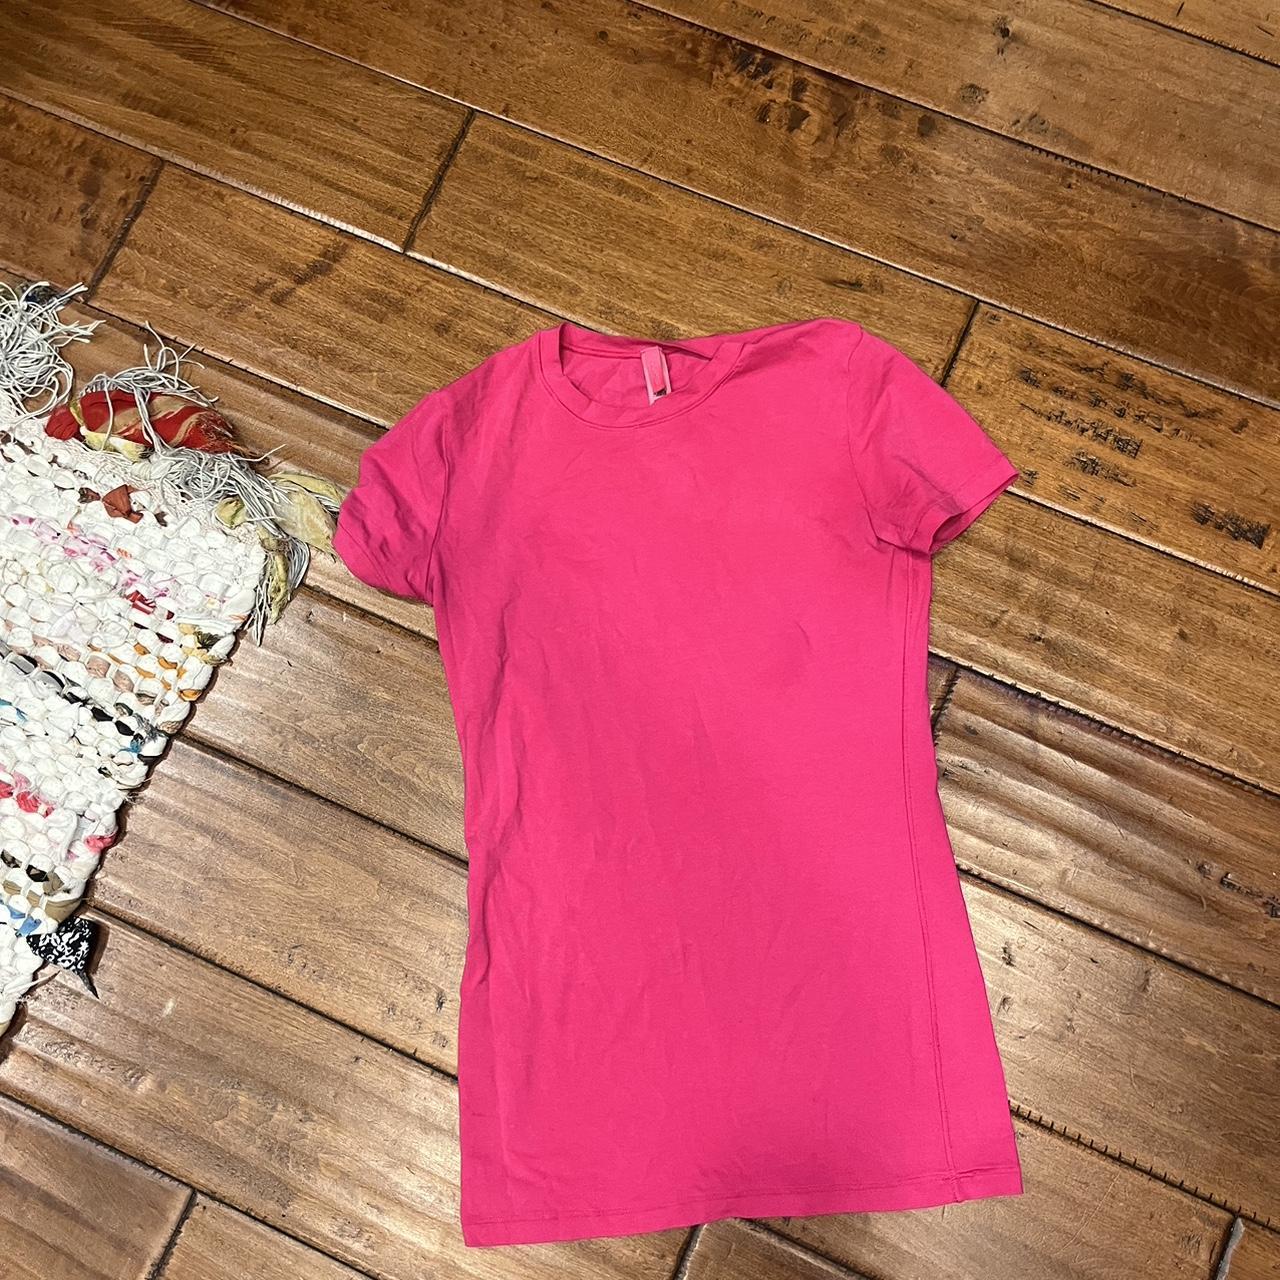 SKIMS Cotton Jersey T-Shirt in Pink SMALL NEW